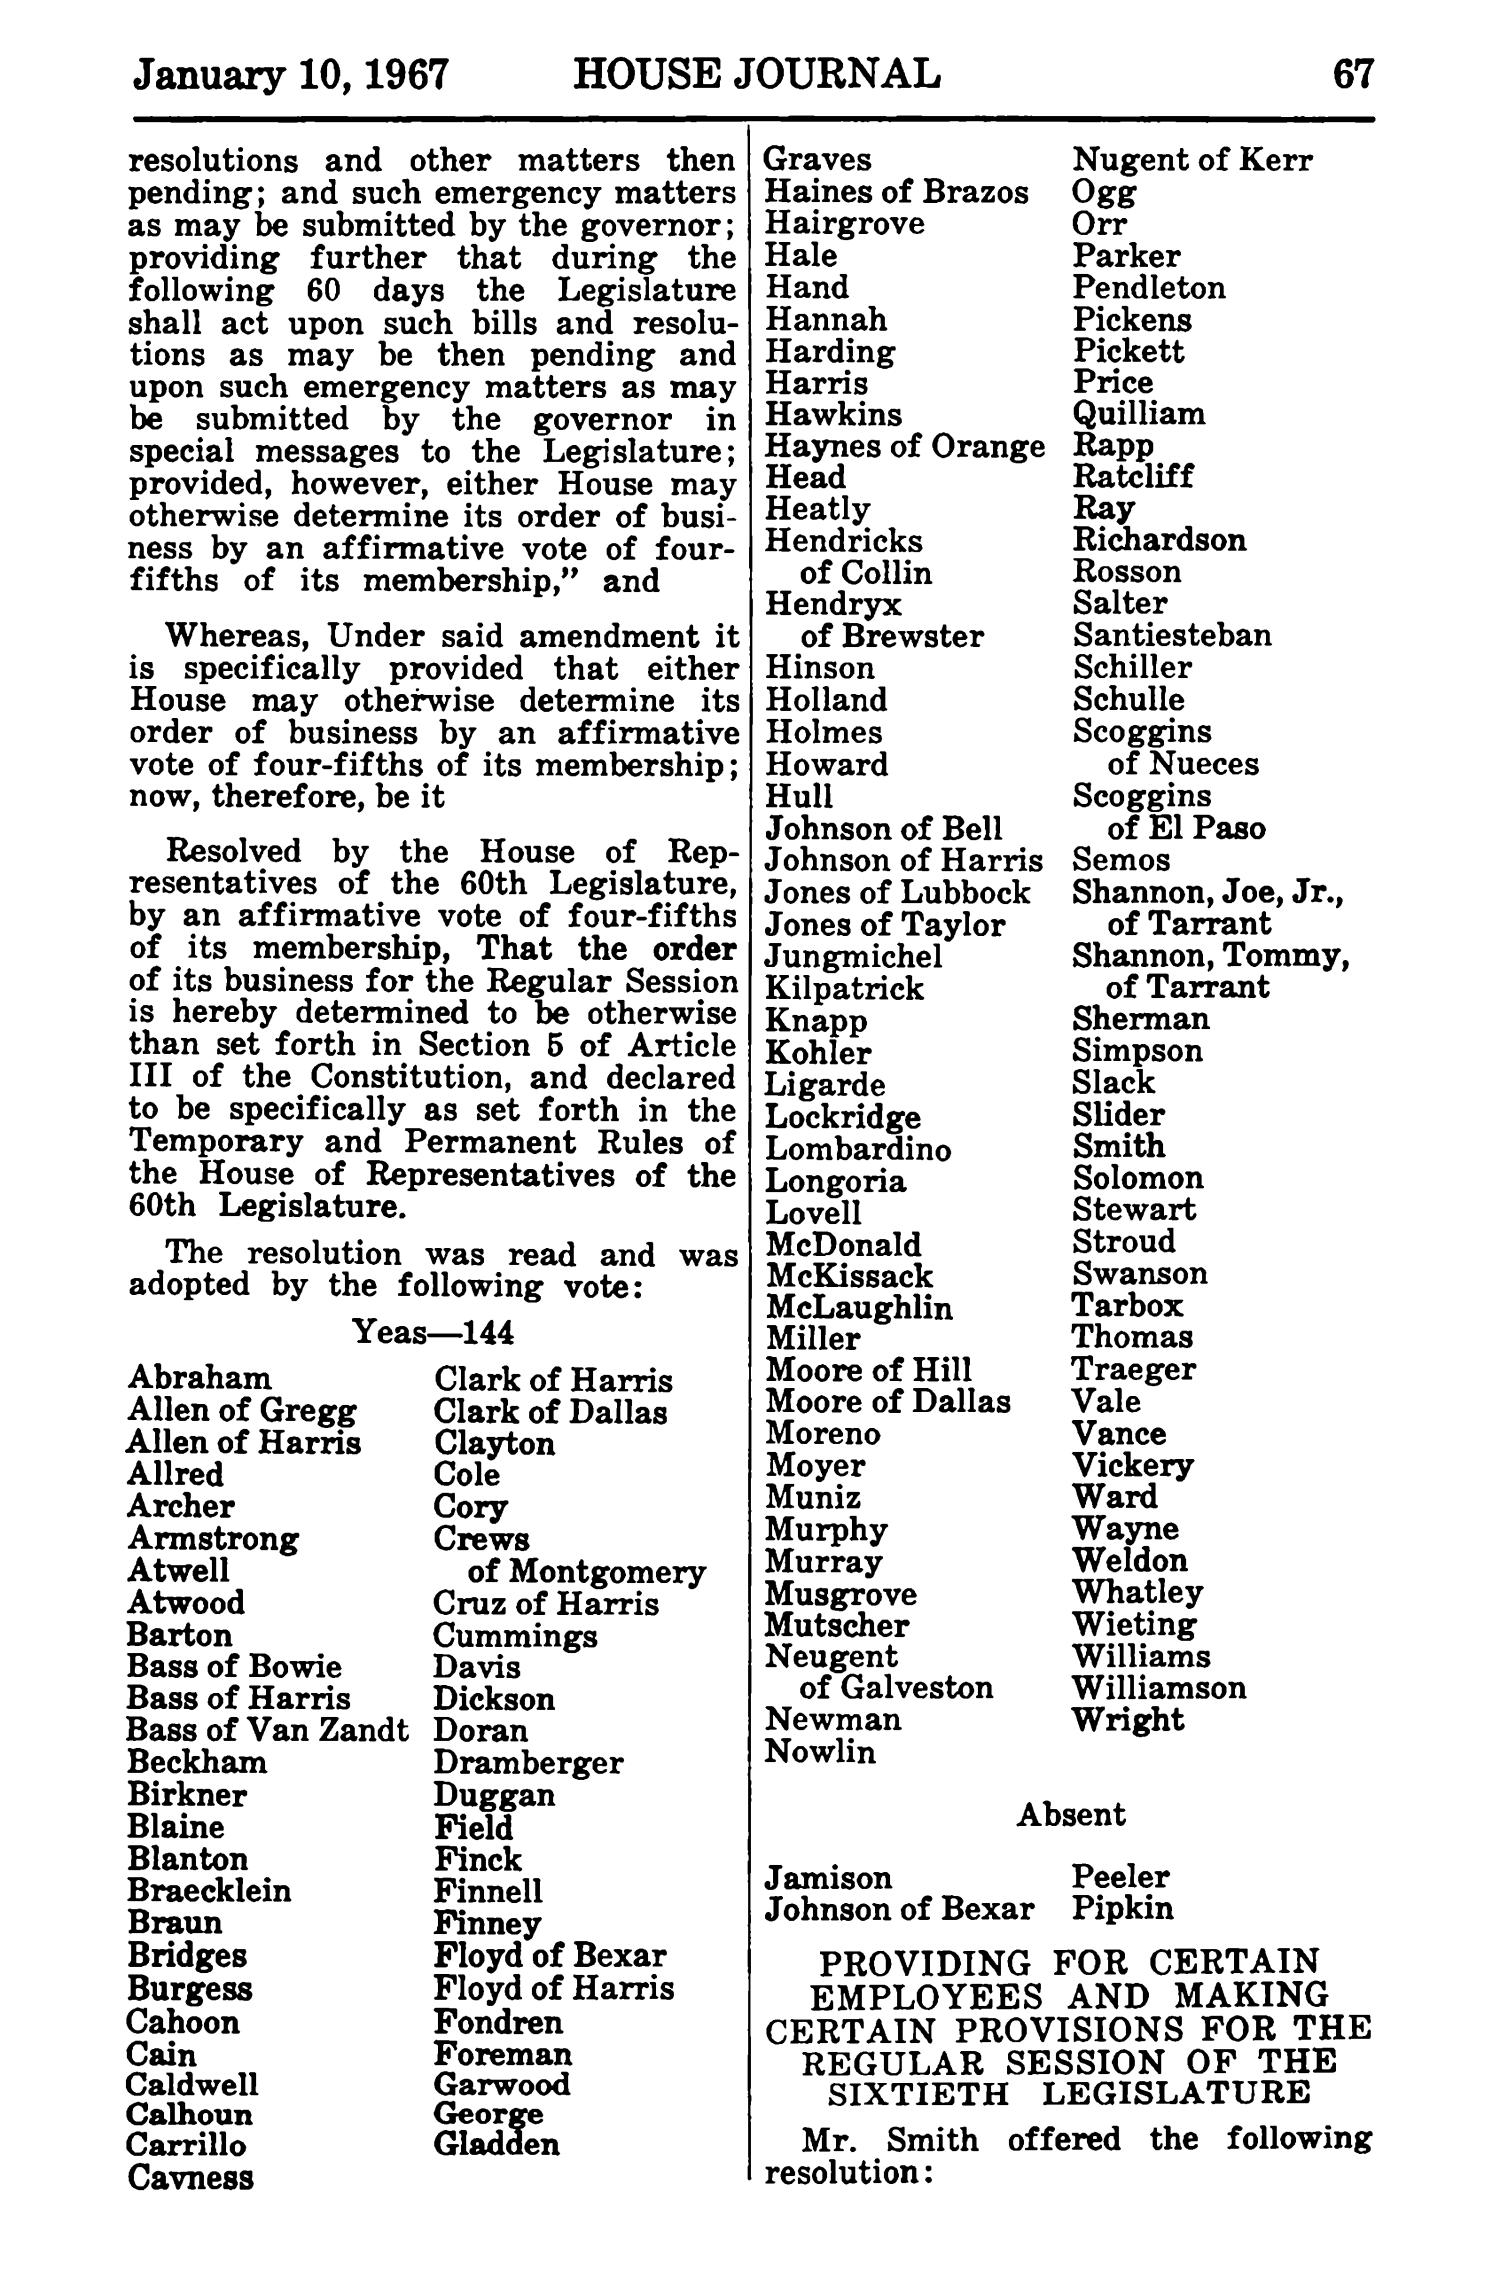 Journal of the House of Representatives of the Regular Session of the Sixtieth Legislature of the State of Texas, Volume 1
                                                
                                                    67
                                                